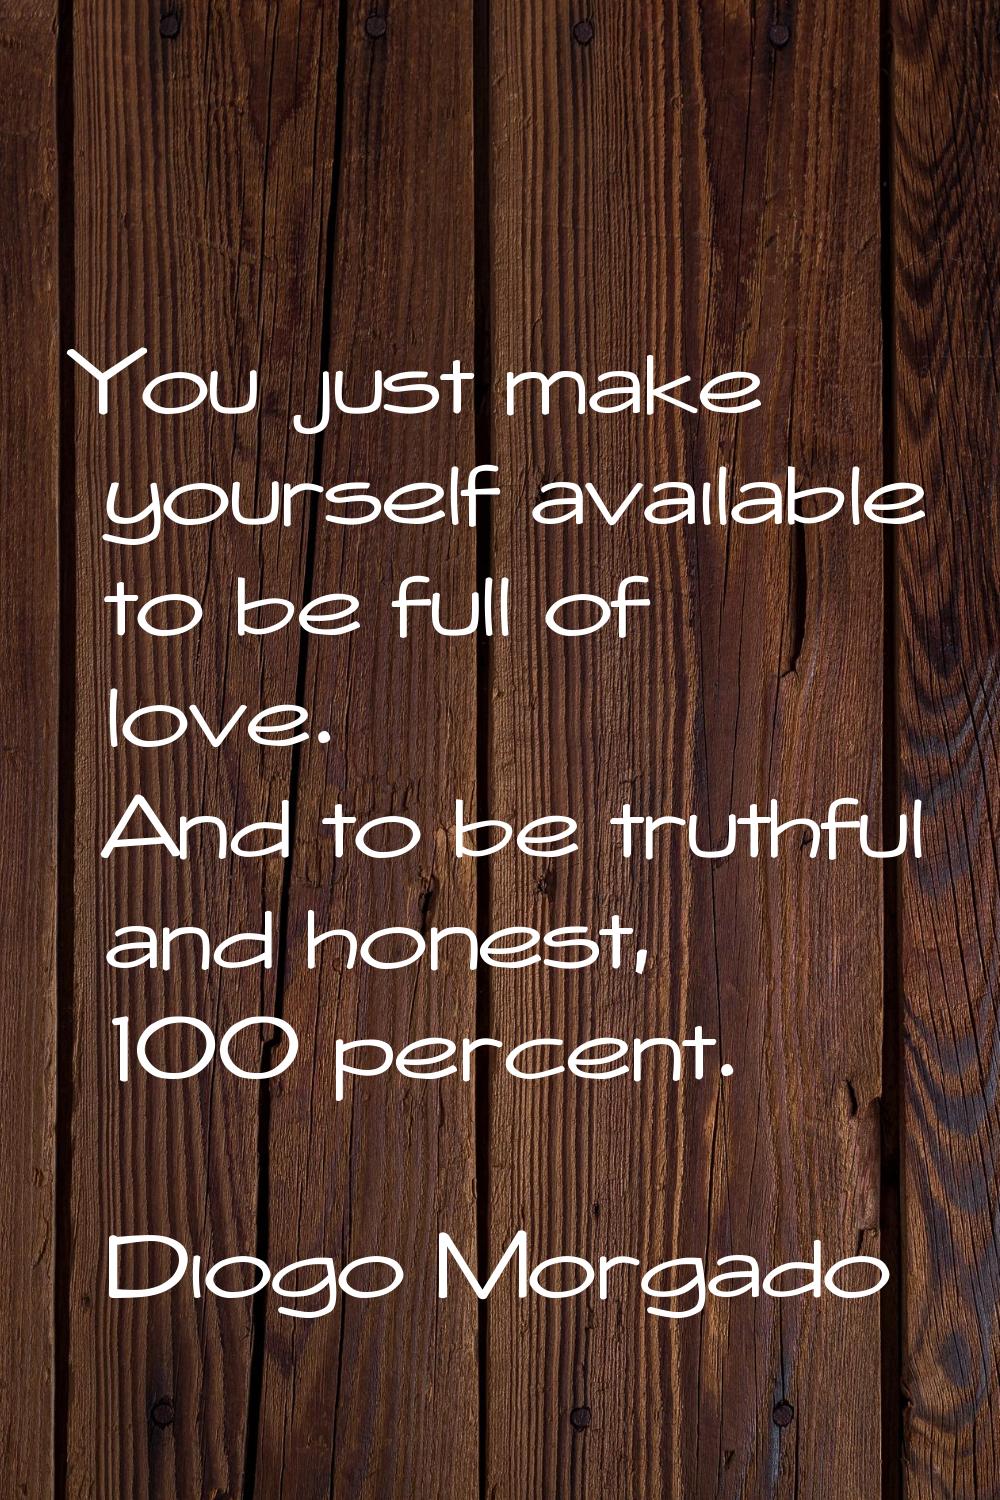 You just make yourself available to be full of love. And to be truthful and honest, 100 percent.